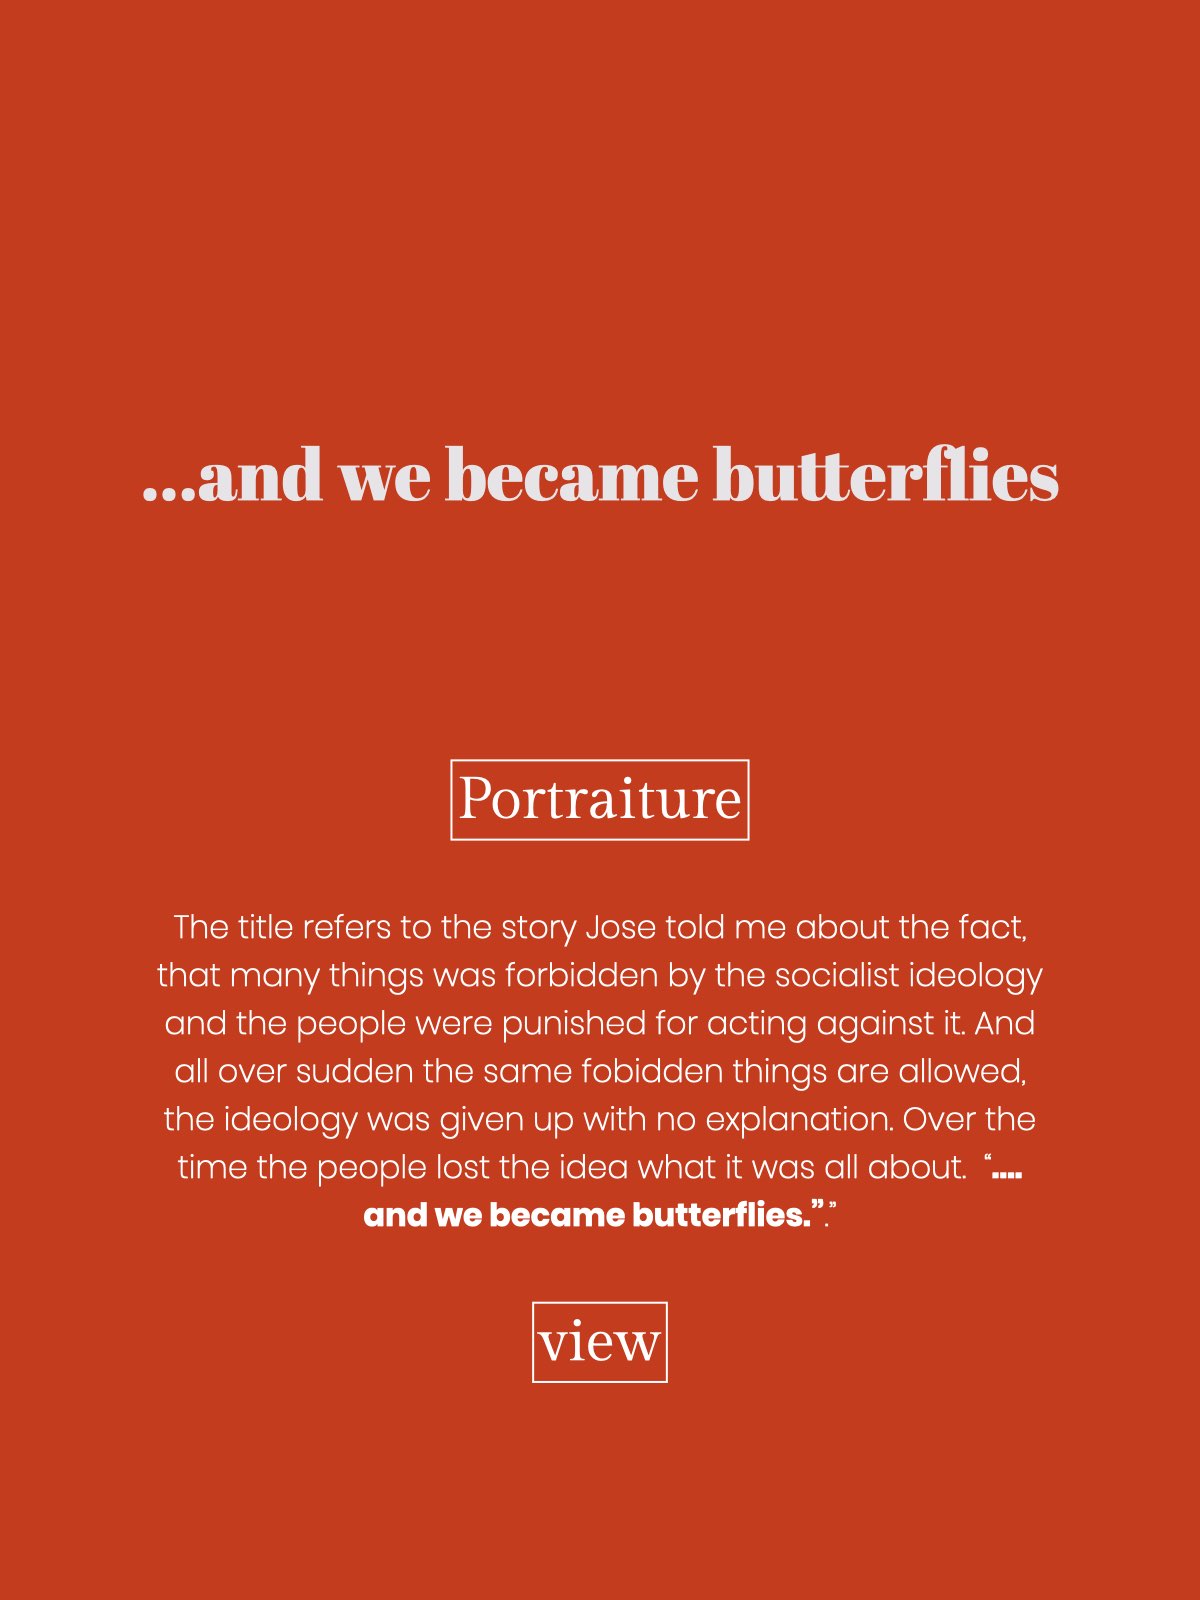 And we became Butterflies